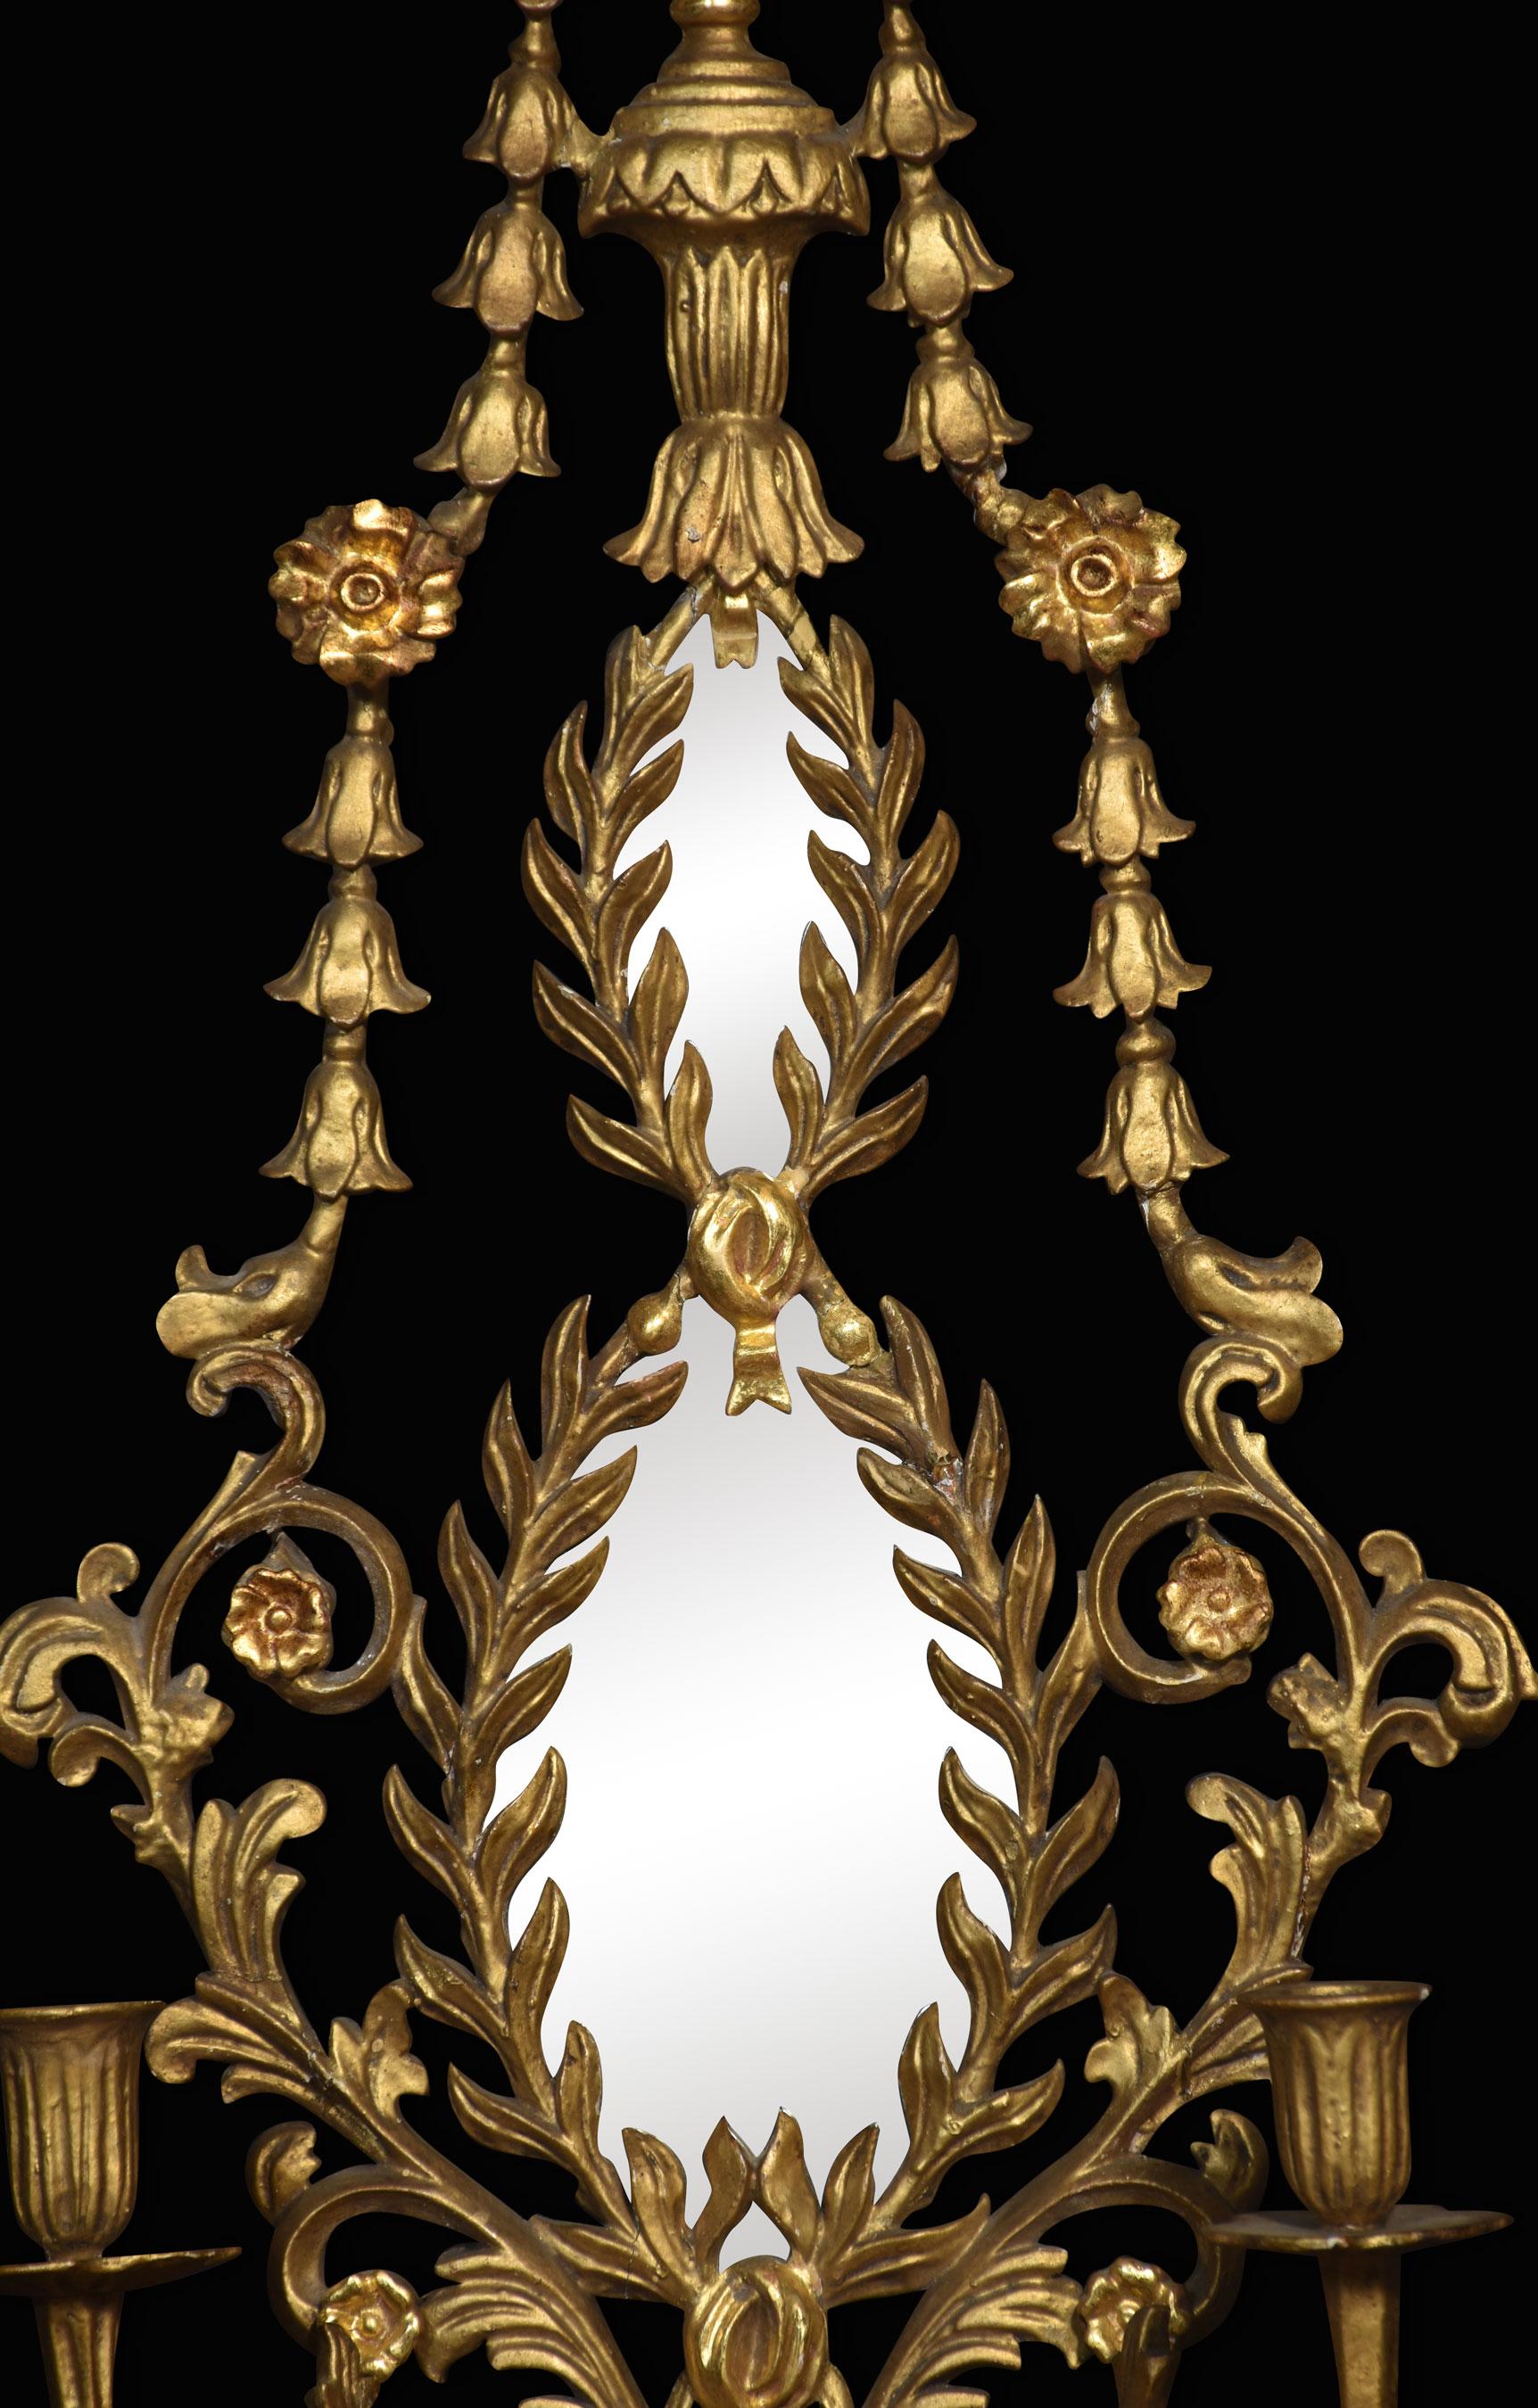 Pair of Neo-Classical style giltwood girandoles, each with vase surmount over twin oval mirrors within laurel wreath frames flanked by bellflower swags, fitted twin branch candle sconces.
Dimensions
Height 40.5 Inches
Width 15.5 Inches
Depth 5.5